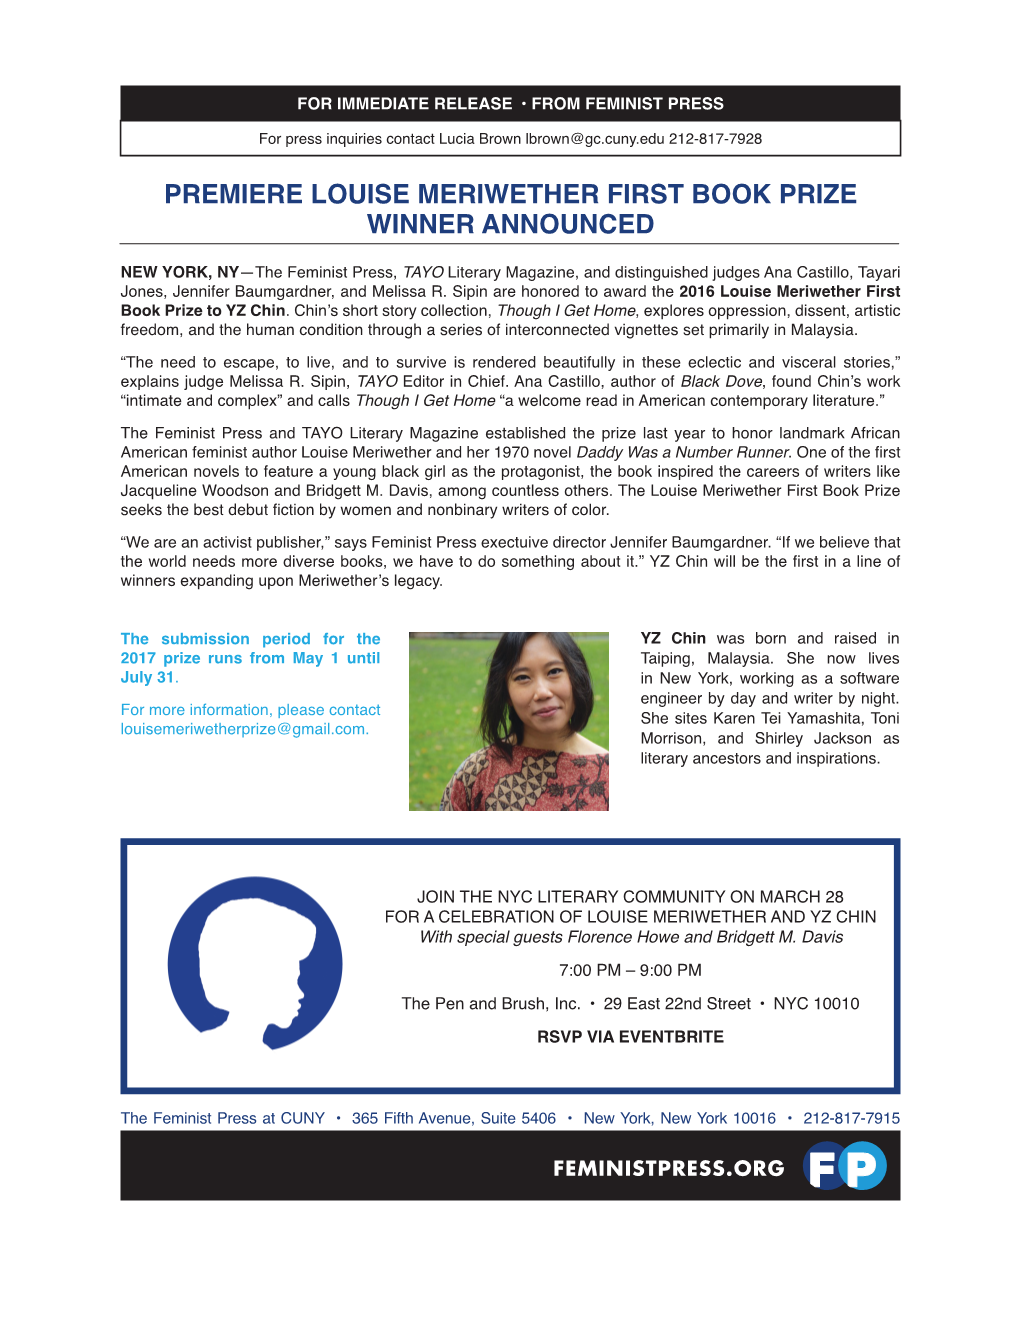 Premiere Louise Meriwether First Book Prize Winner Announced